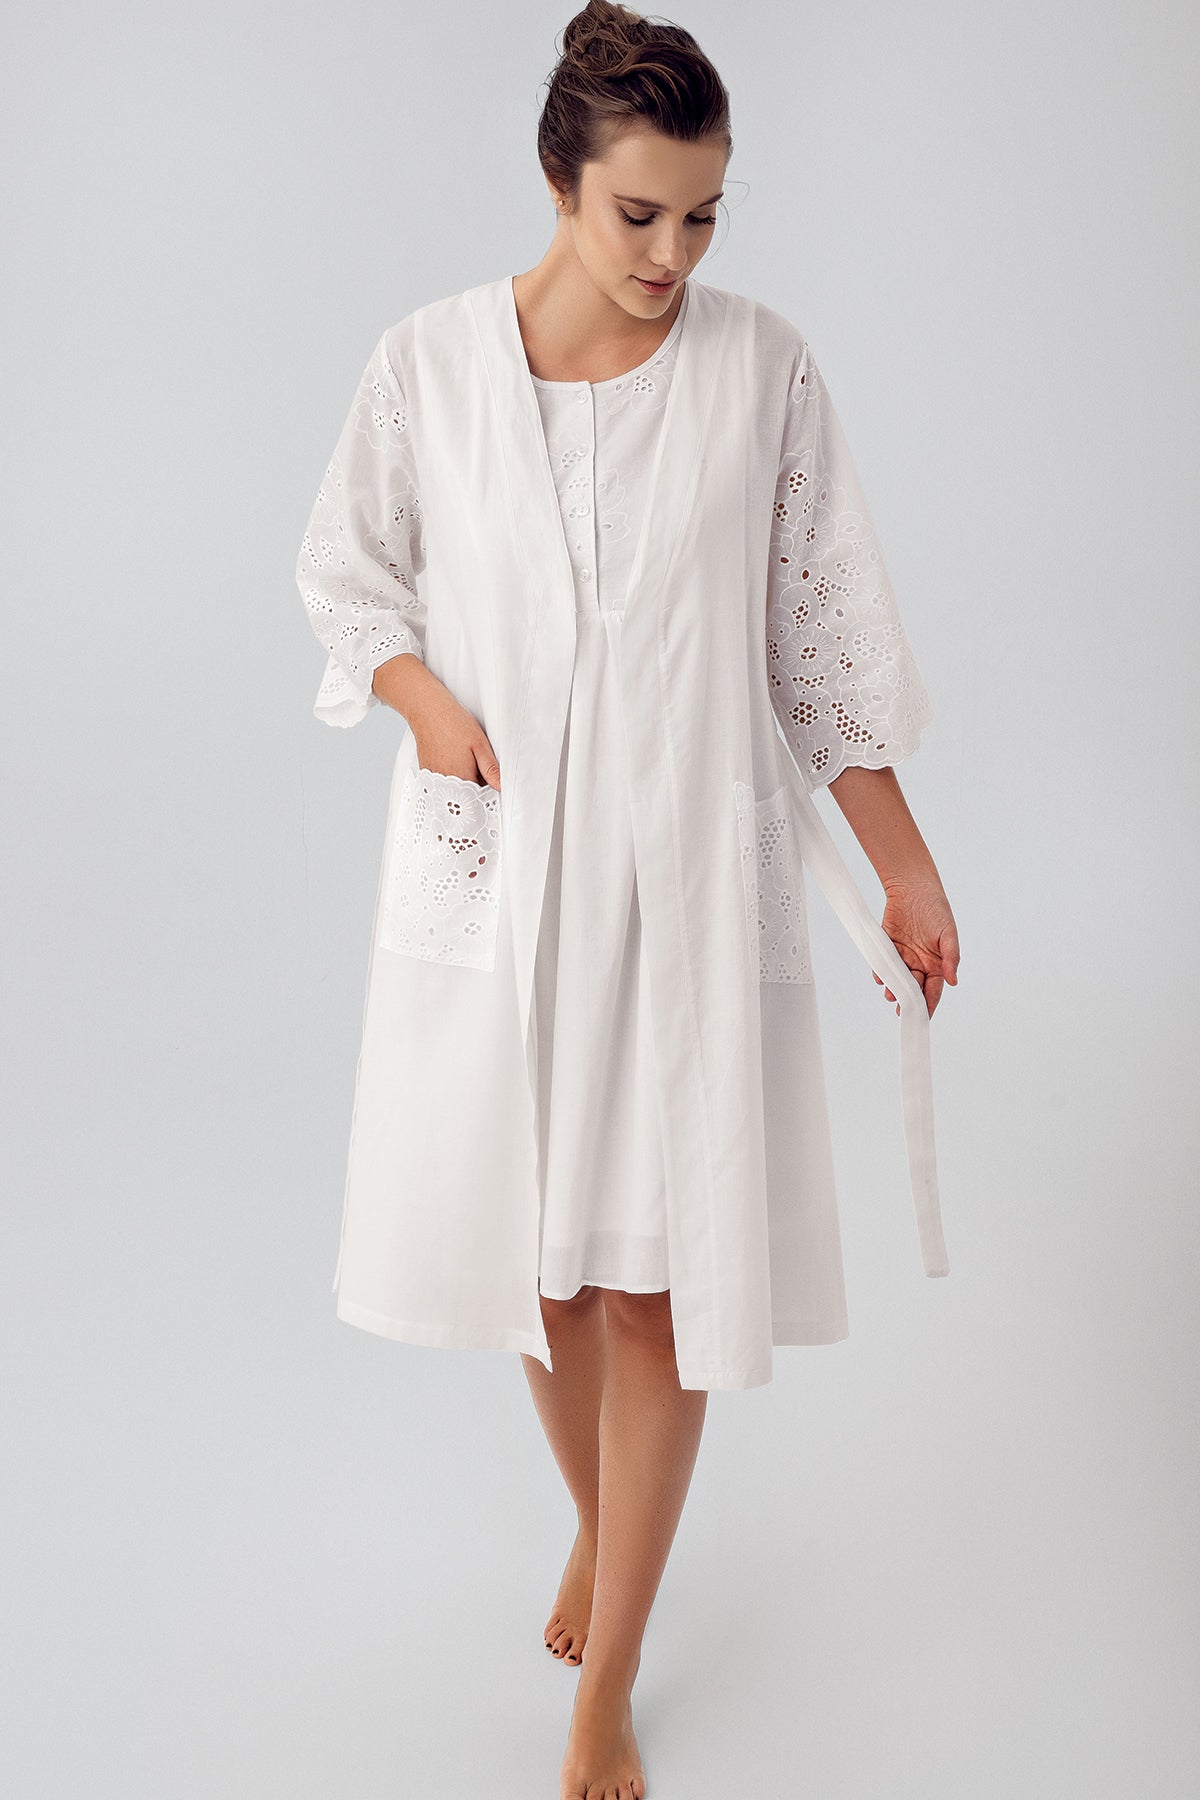 Shopymommy 16414 Embroidered Maternity & Nursing Nightgown With Robe Ecru